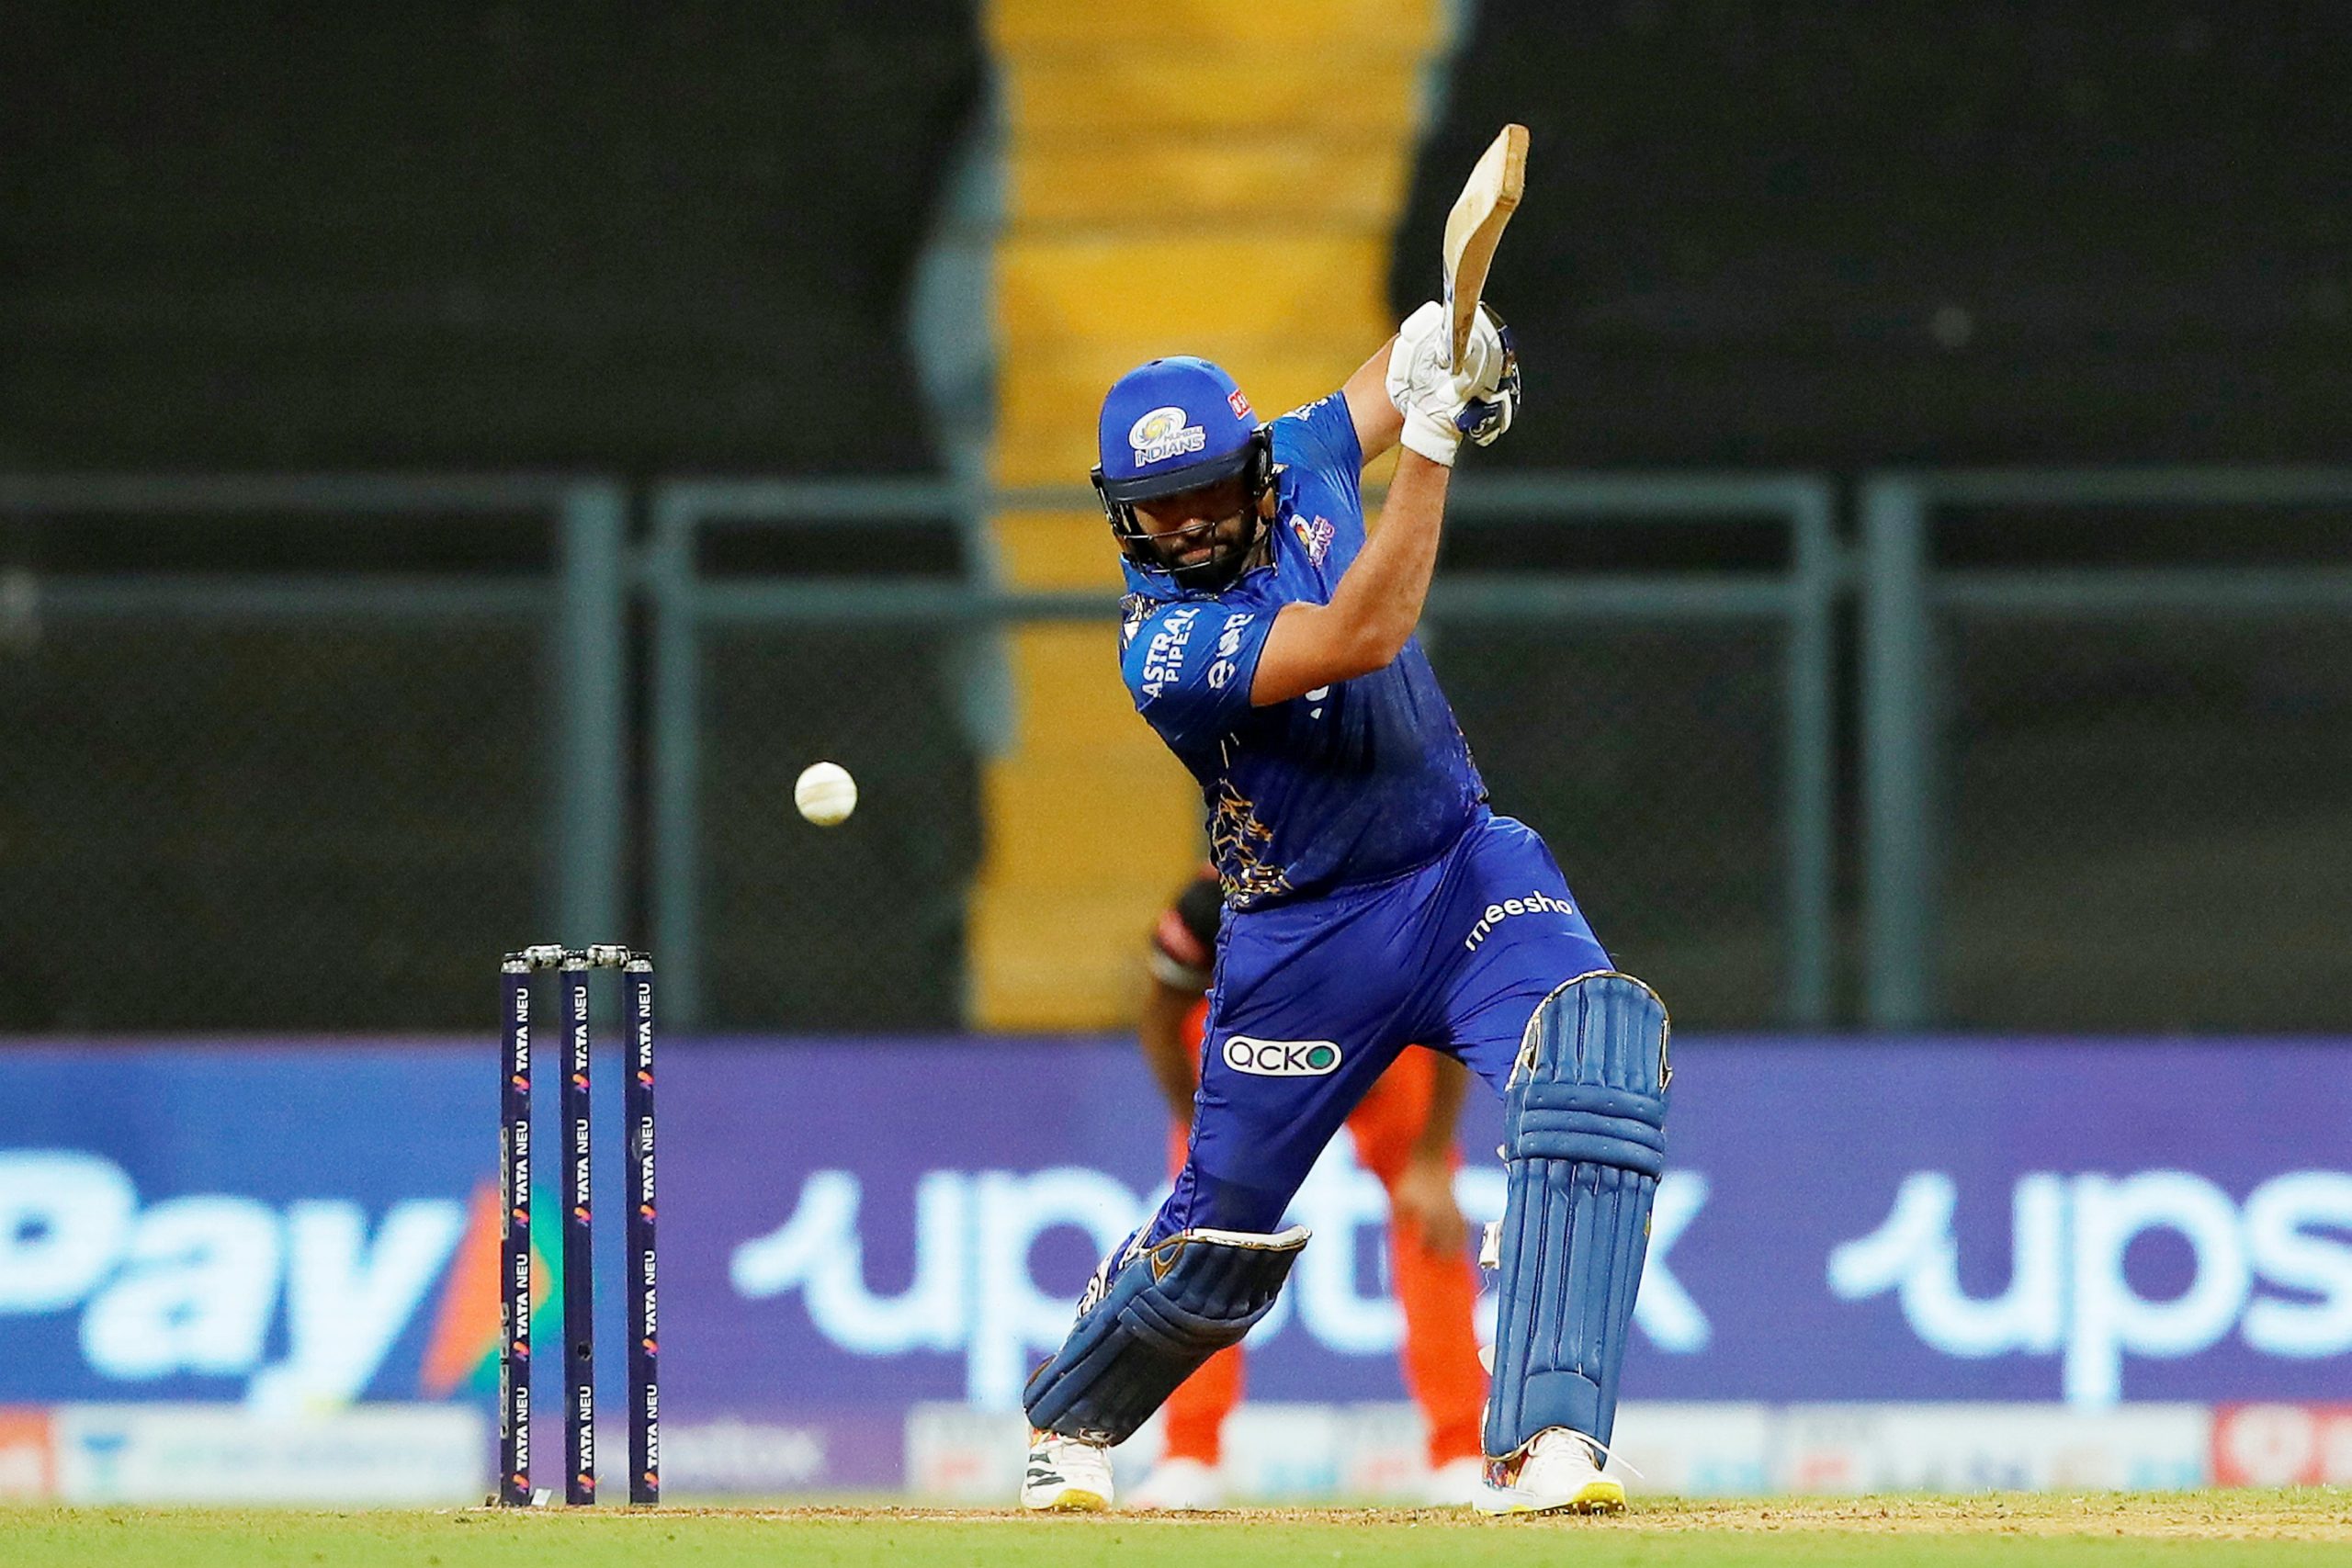 Rohit Sharma finishes IPL 2022 with no fifty, a first for Mumbai captain